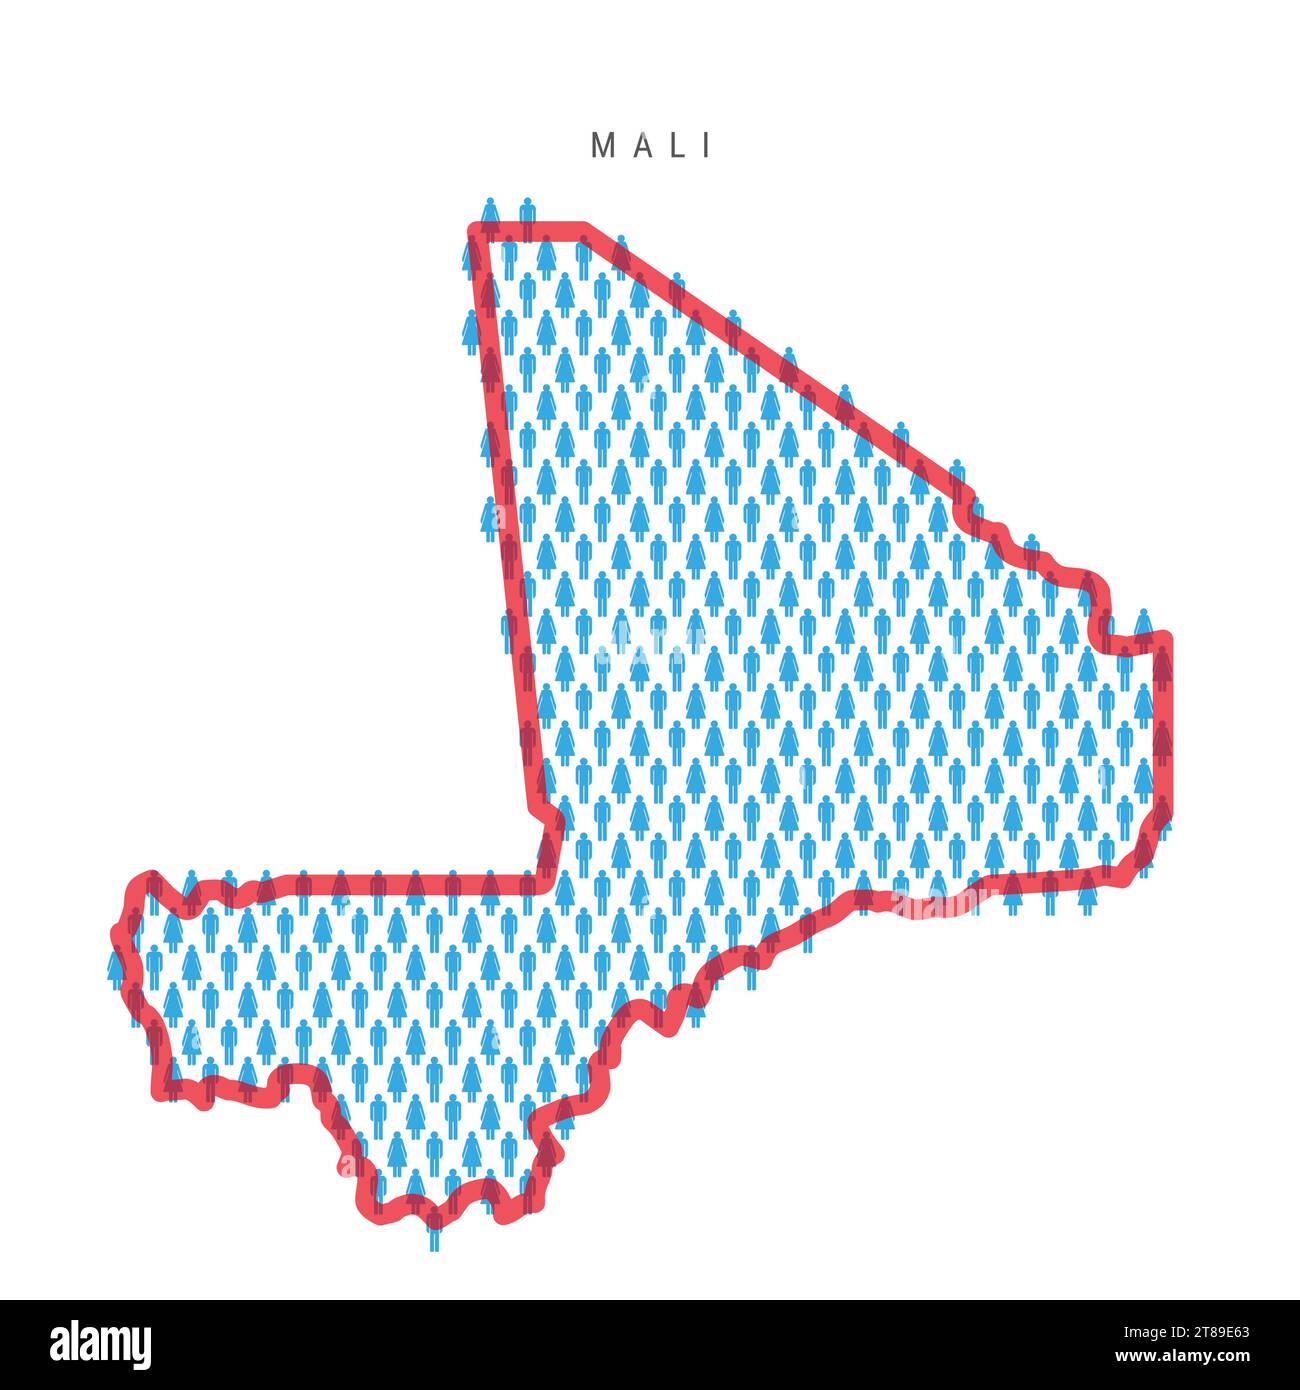 Mali population map. Stick figures Malian people map with bold red translucent country border. Pattern of men and women icons. Isolated vector illustr Stock Vector